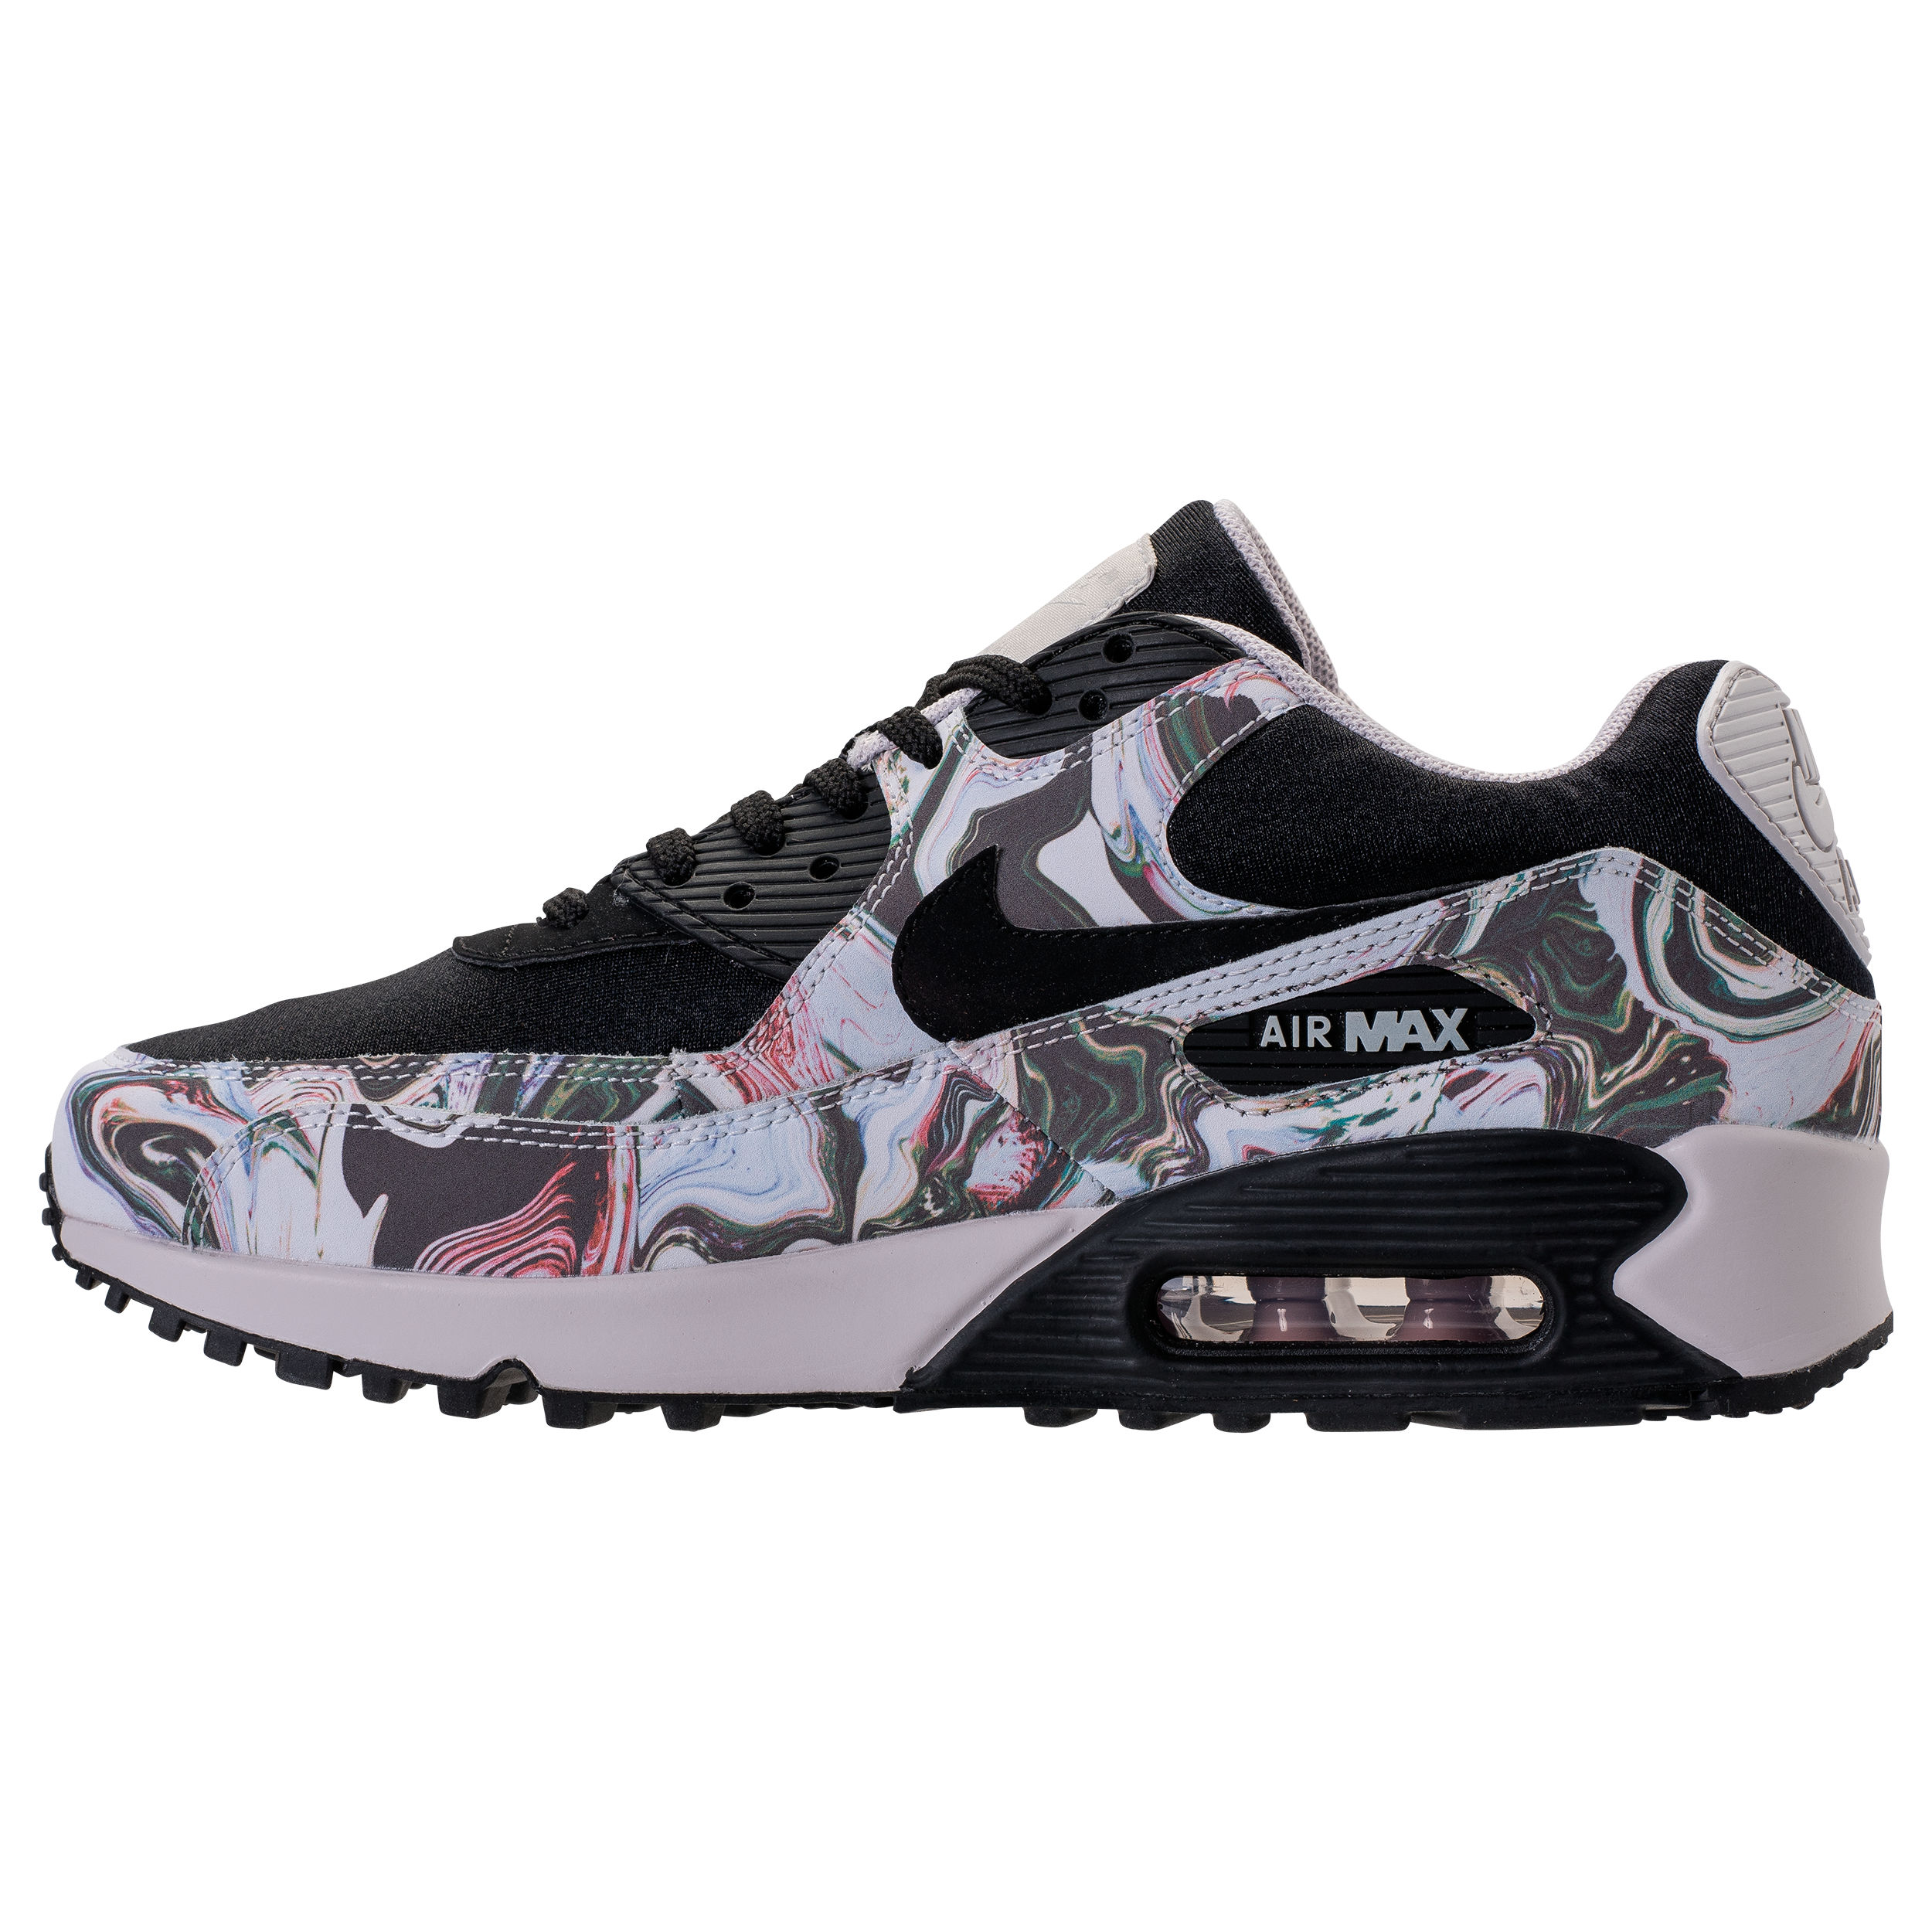 nike air max 90 marble 4-20 3 - WearTesters